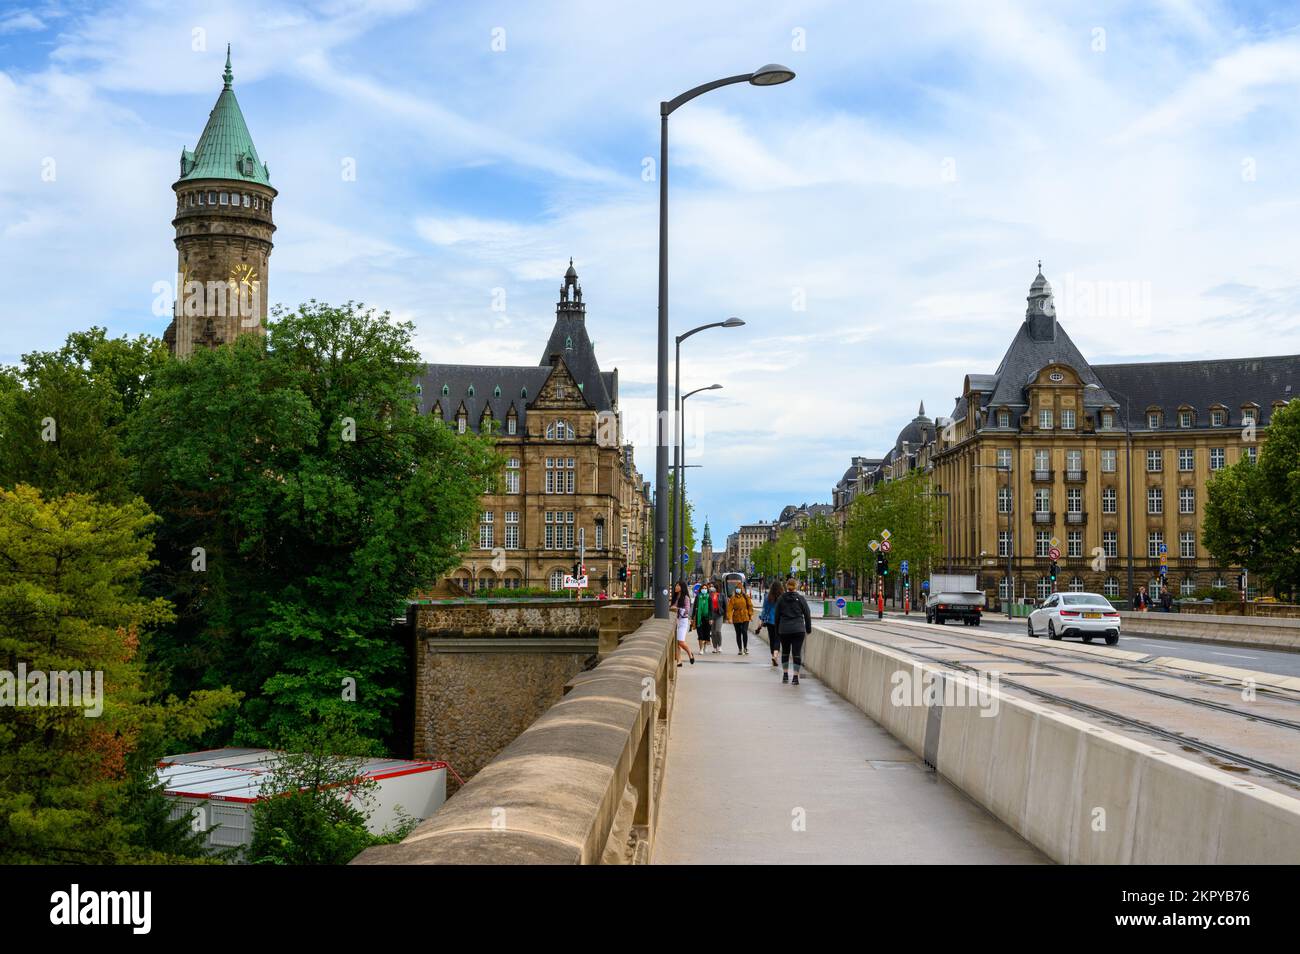 A view of the city of Luxembourg from the Adolphe Bridge. The towering building is the State Bank and Savings Fund headquarters (Spuerkeess). Stock Photo